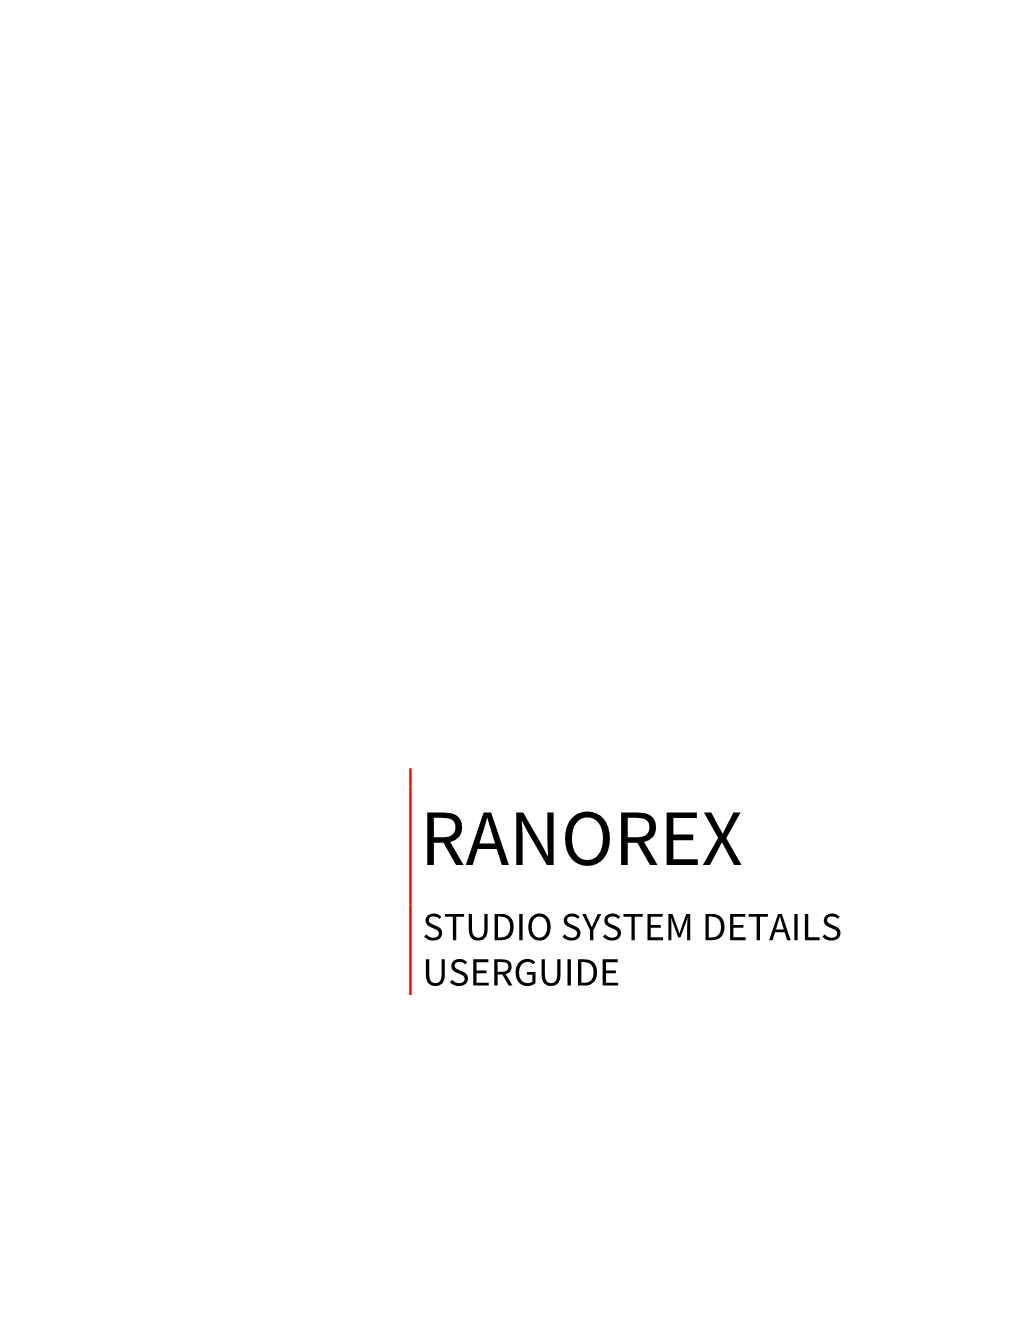 Studio System Details Userguide Table of Contents Ranorex Studio System Details